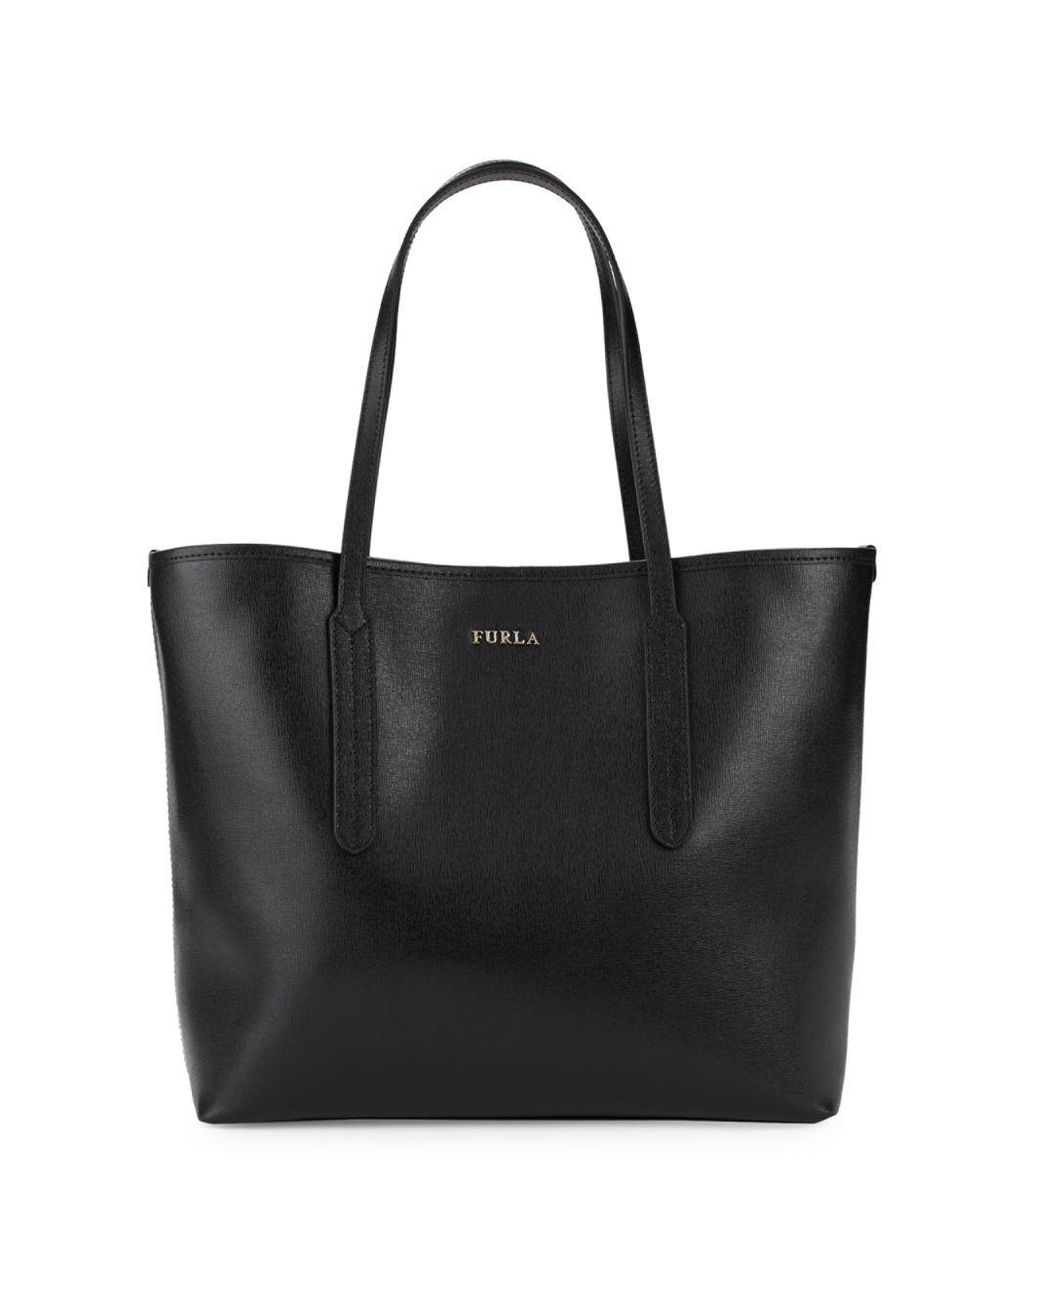 Furla Ariana Leather Open Tote Bag in Black | Lyst